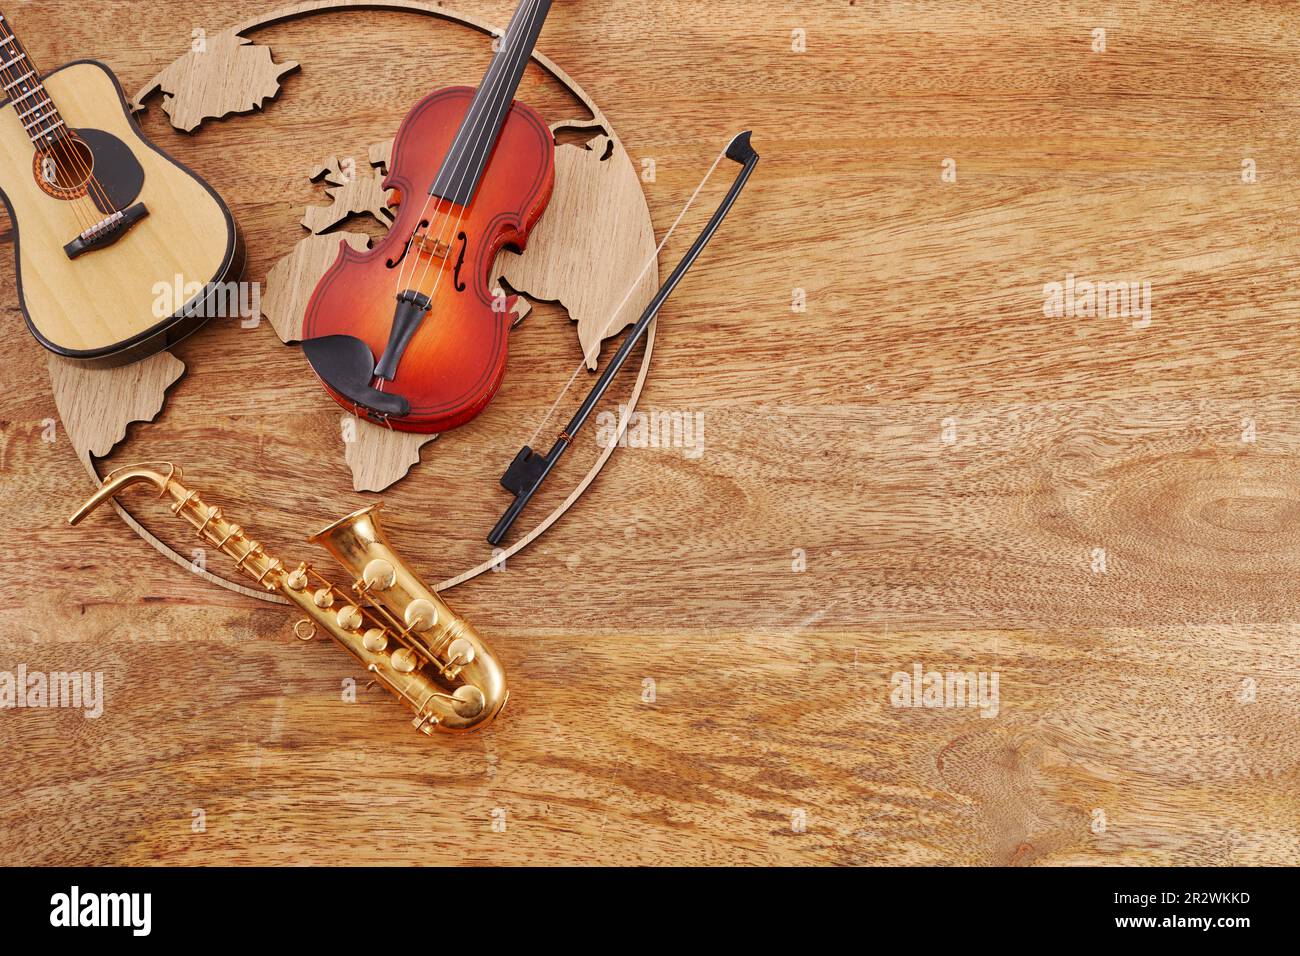 Happy world music day. Musical instruments with globe background. Stock Photo